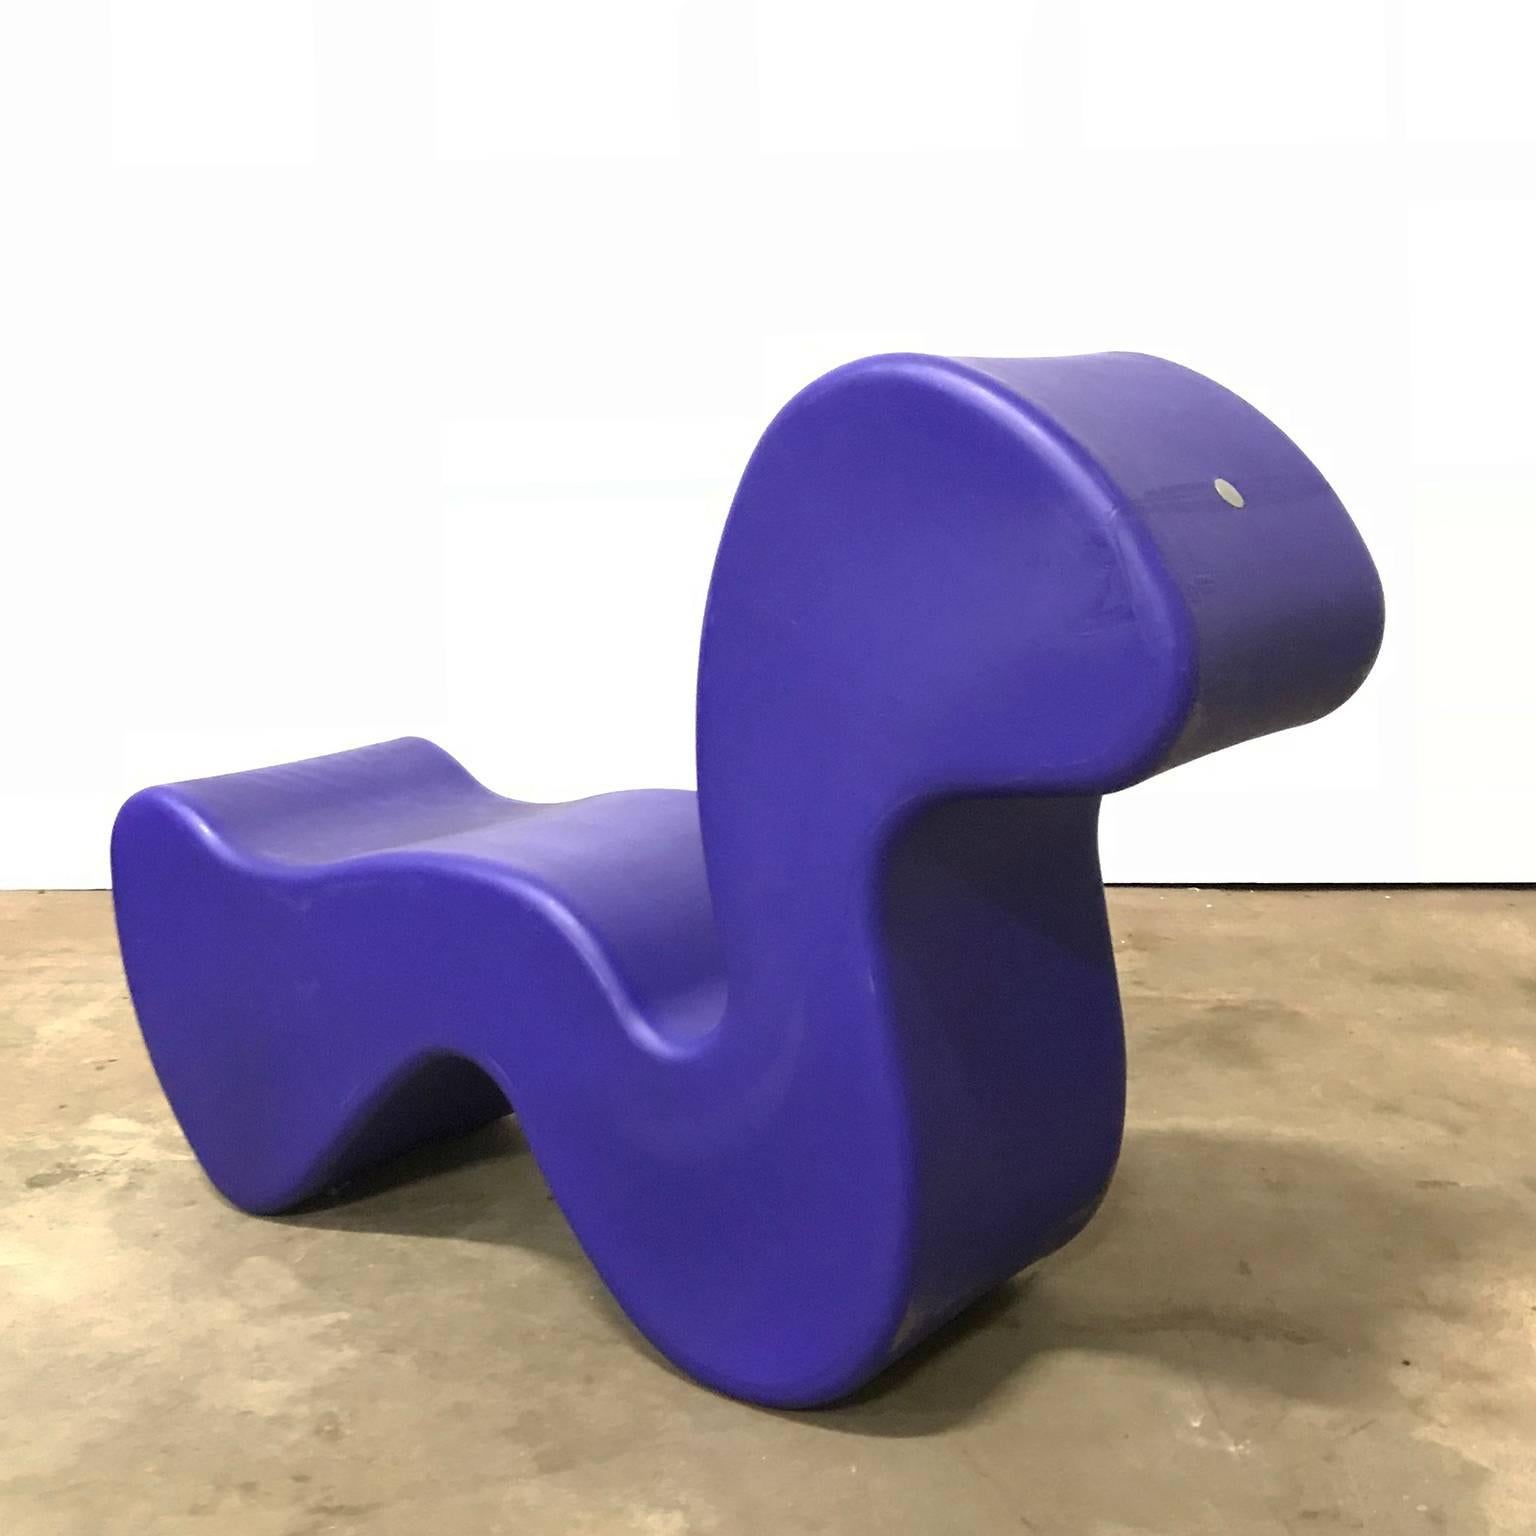 Purple Phantom. Original Phantom chair/table in plastic including marks and stamps. Multiuse chair, bench, table designed by Verner Panton. By rotating the form you can change its function; high back lounge chair, deep seated lounge chair, two